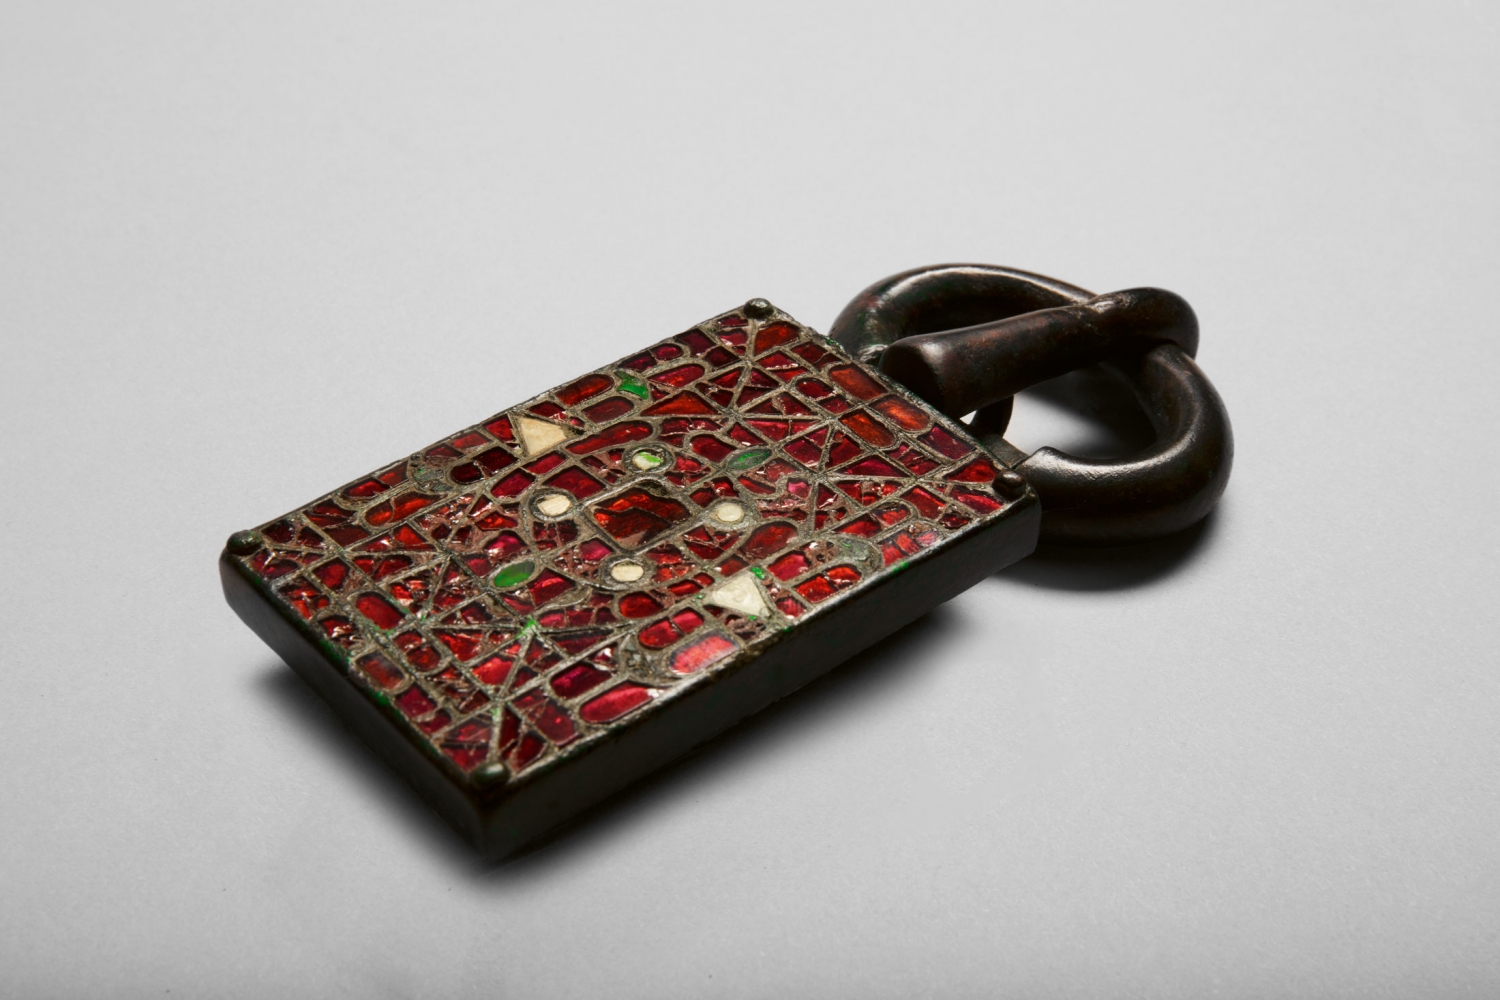 A belt buckle inlaid with garnet and glass, c. 540- 560